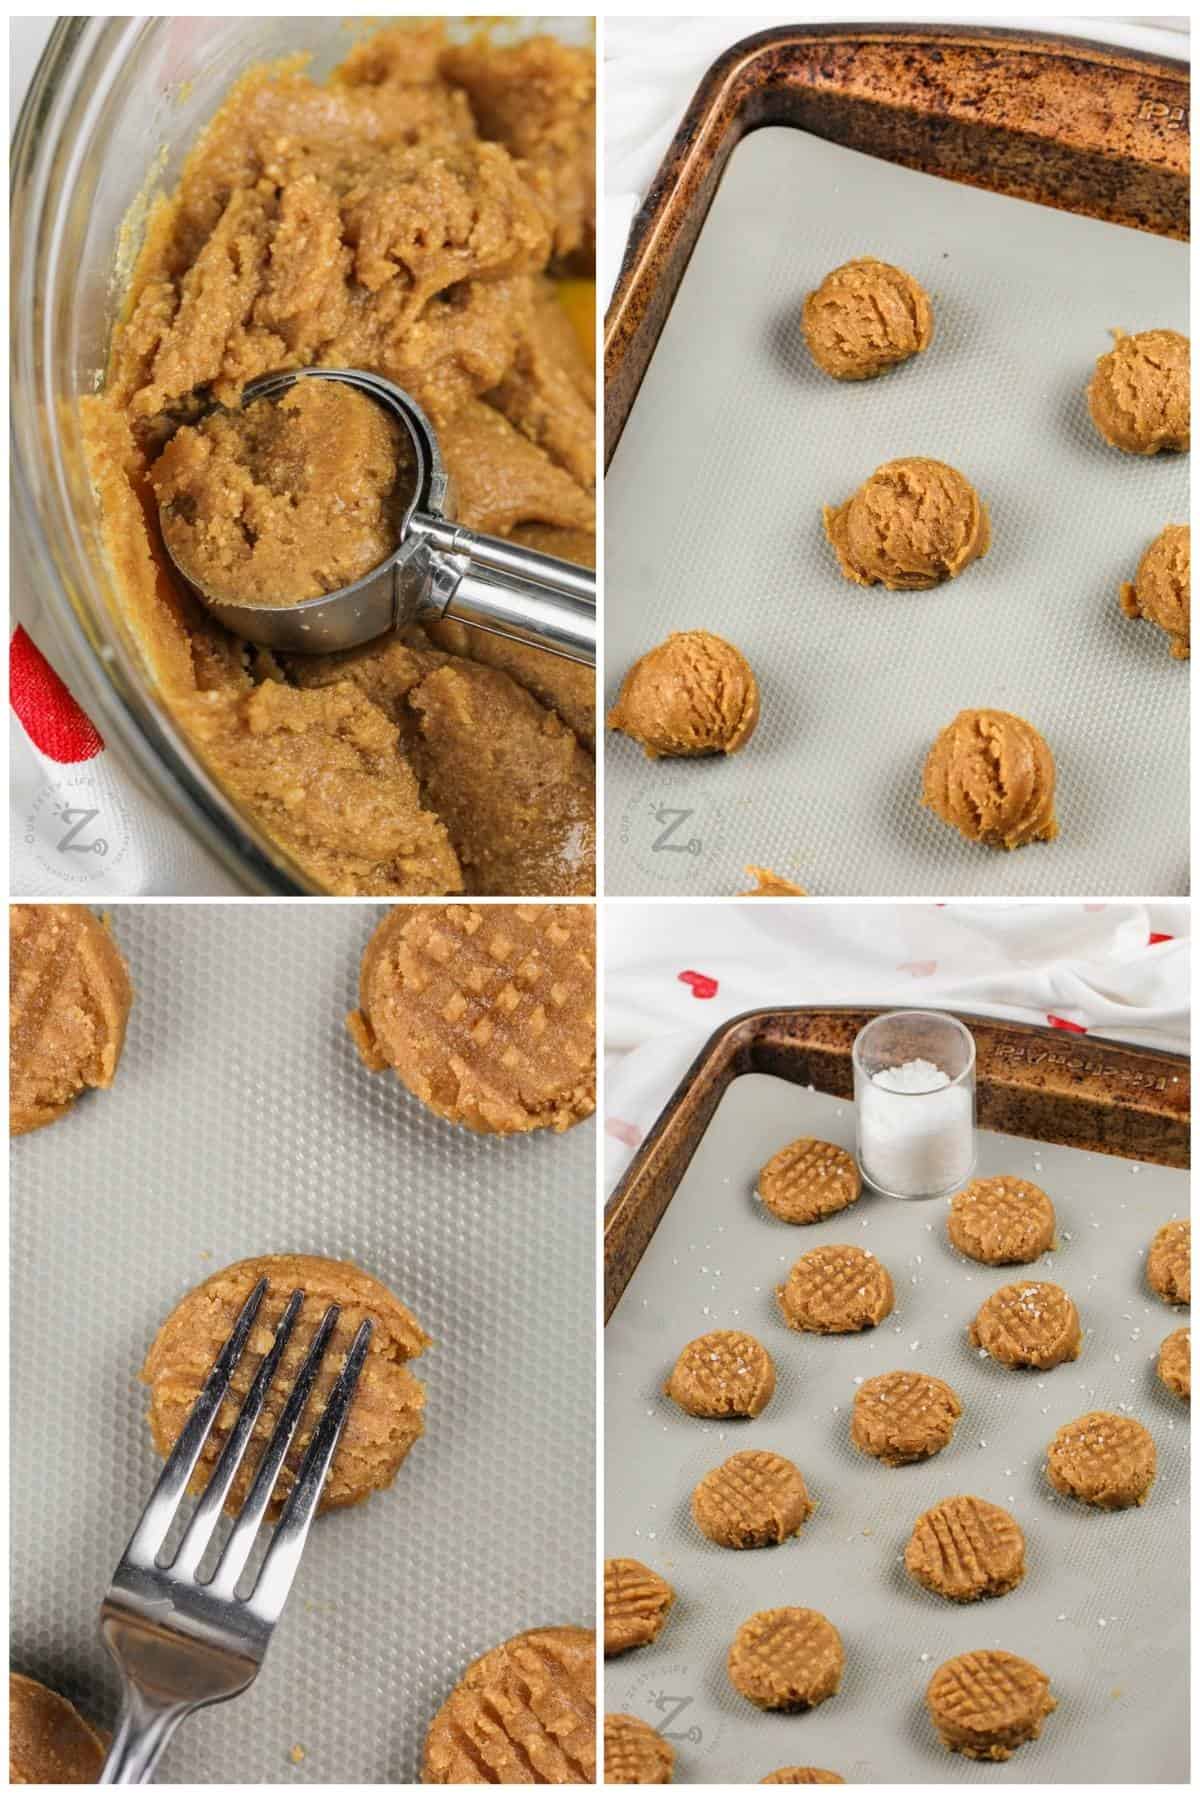 process of making Flourless Peanut Butter Cookies and putting on baking sheet